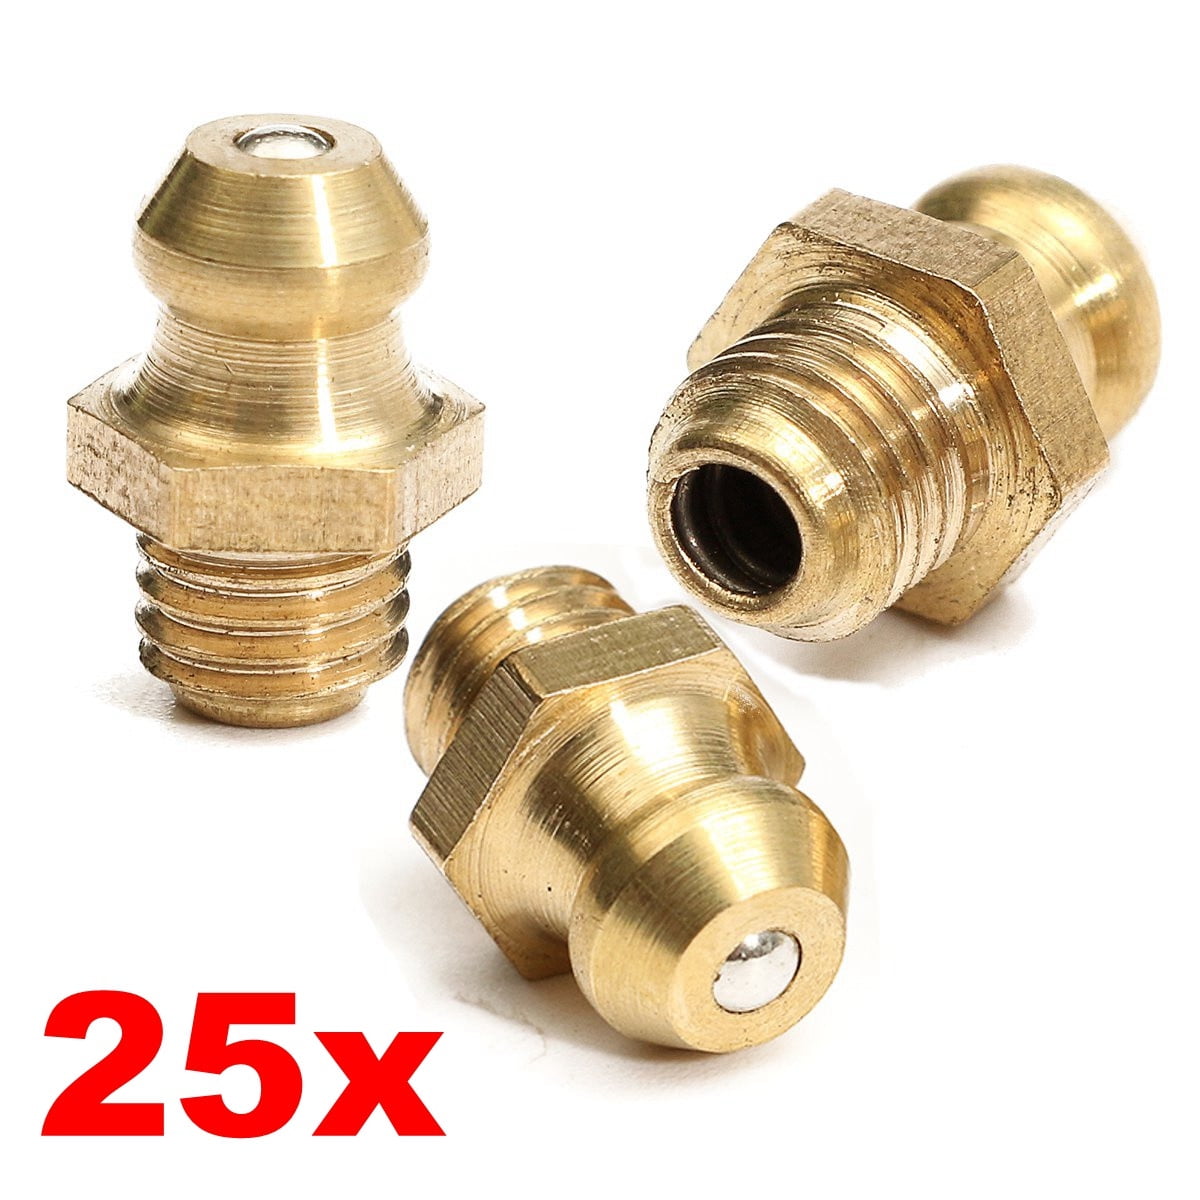 5/16 Drive Type Grease Zerk Nipple Fitting Price for 50 pcs 